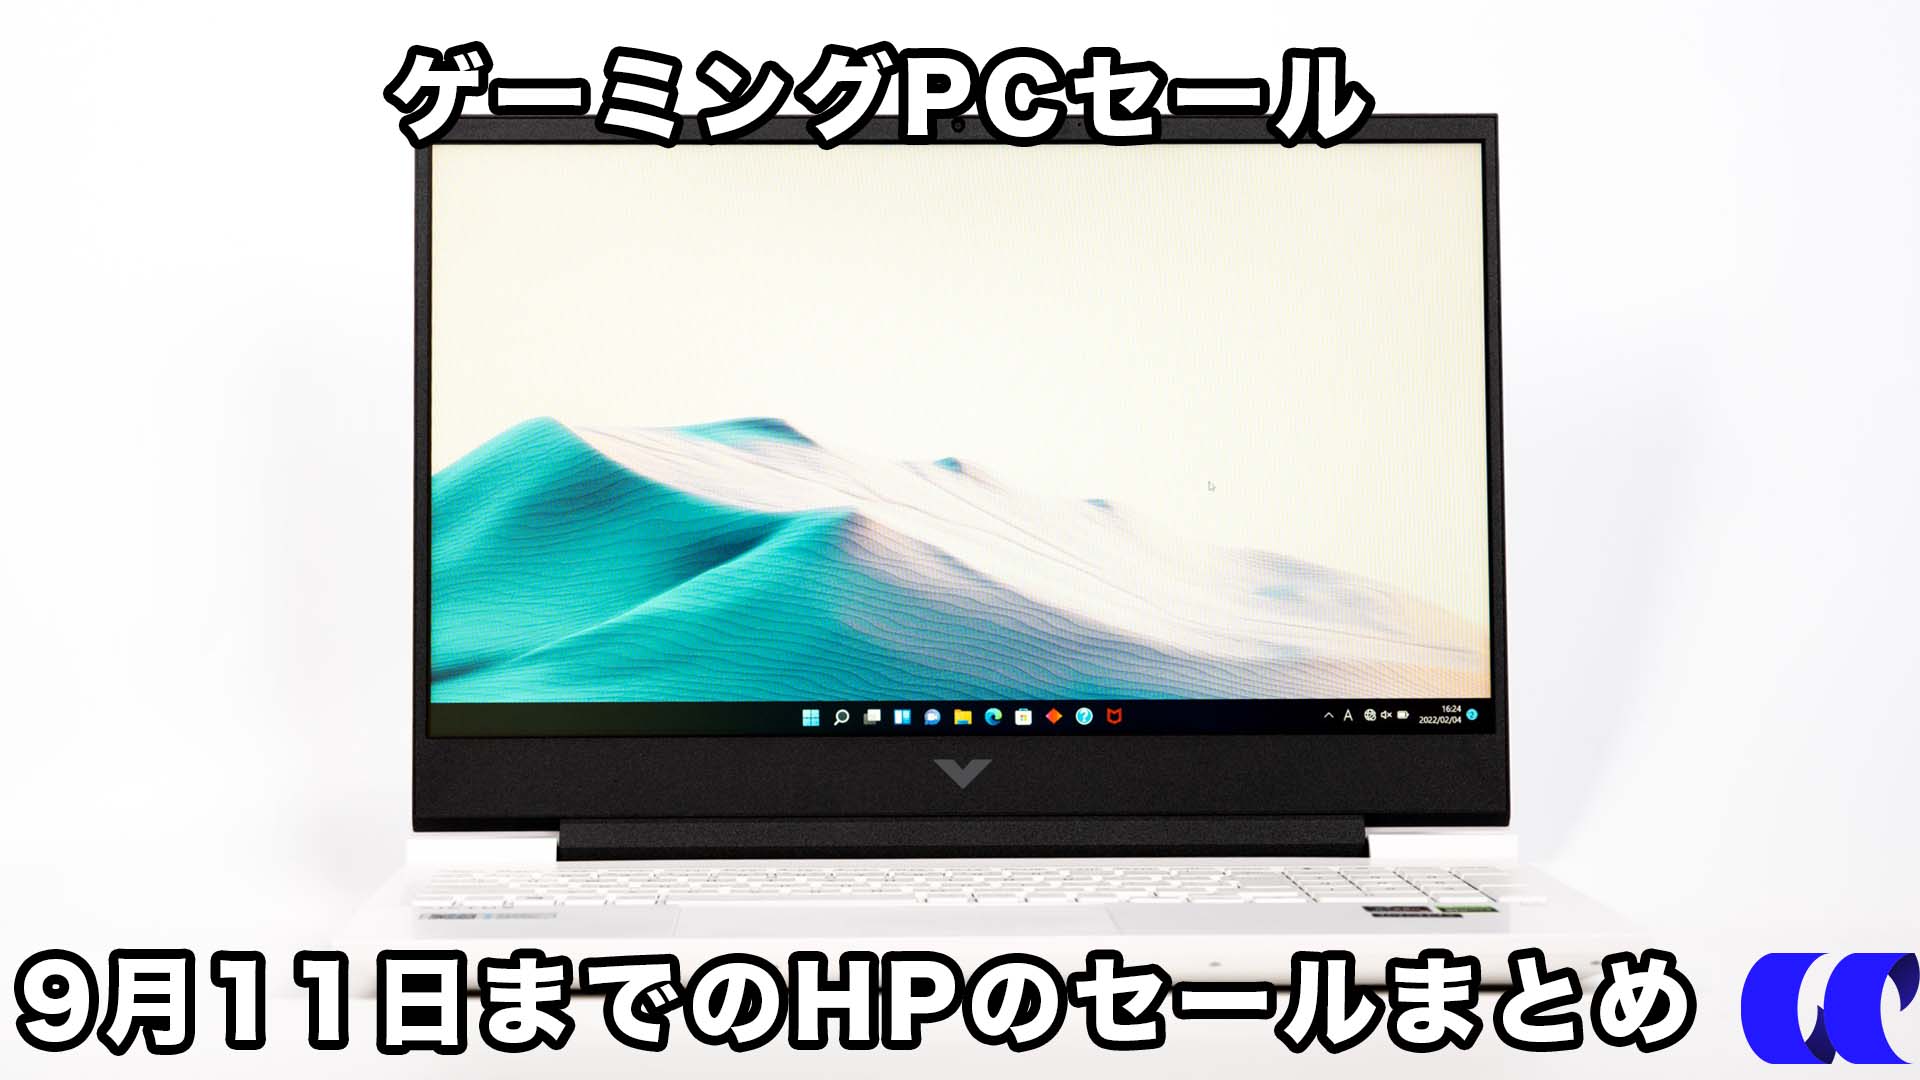 SALE／87%OFF】 27日限定大幅値下げ DELL デル ノートパソコン